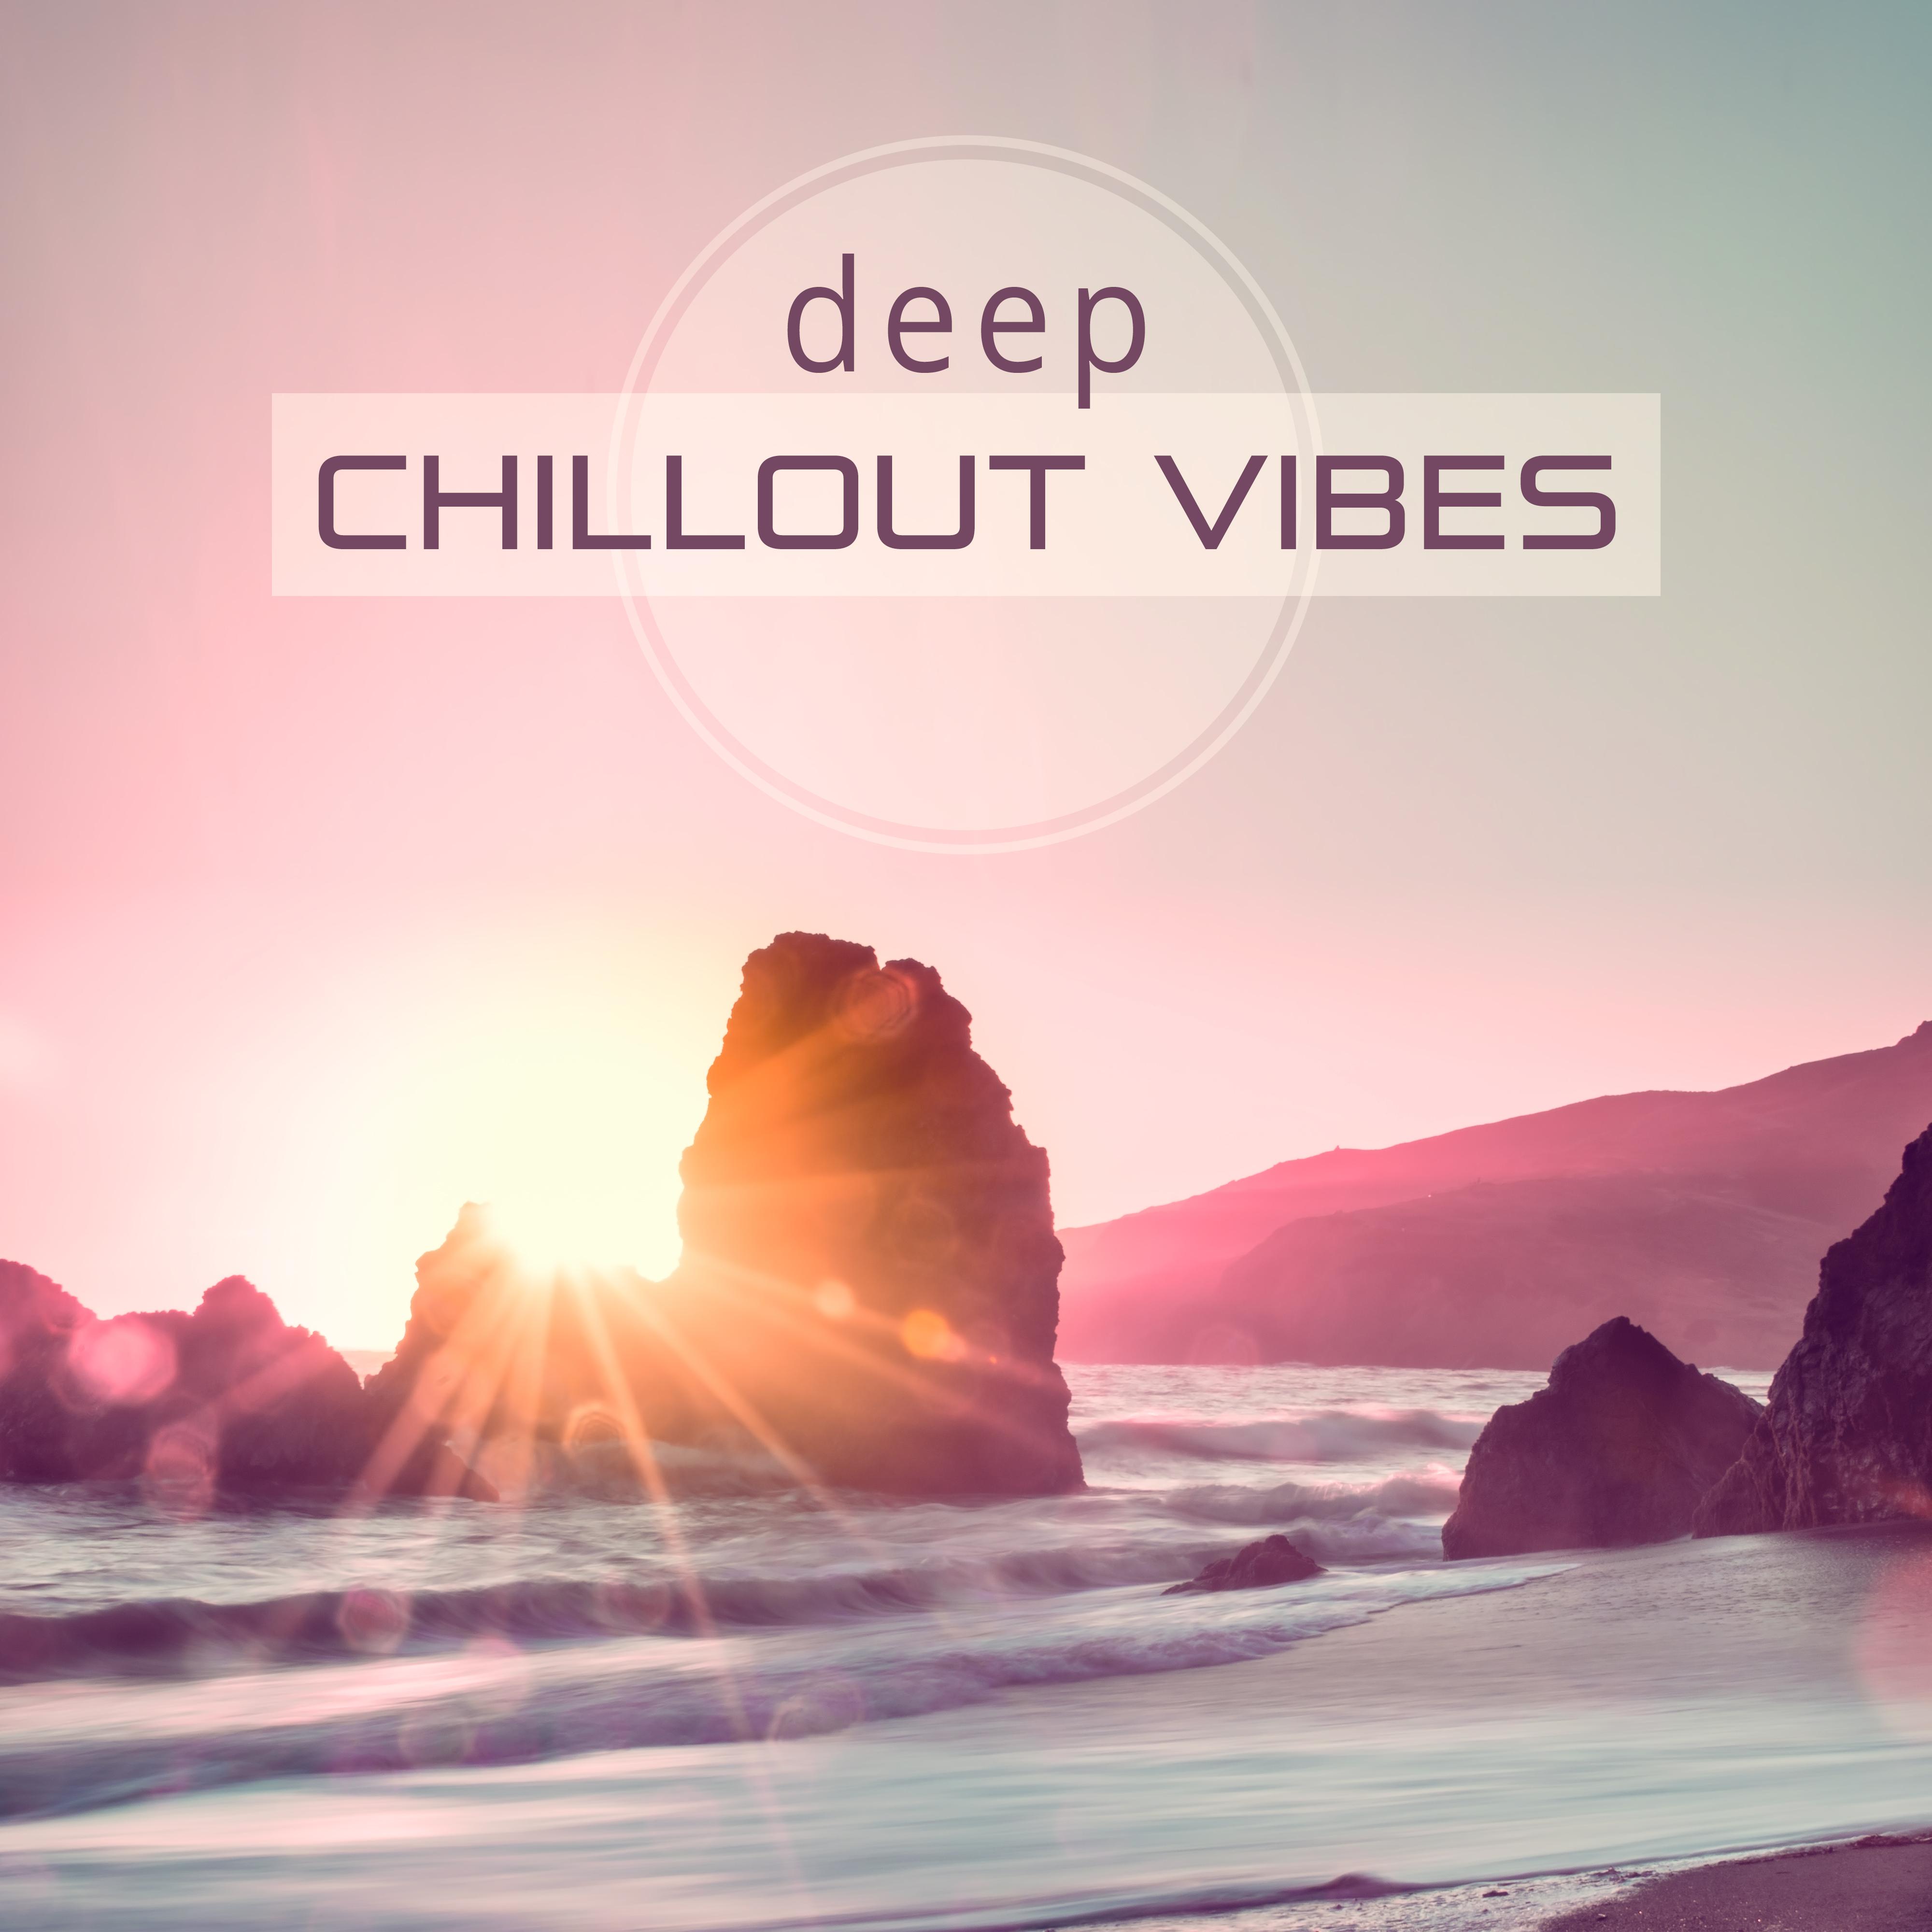 Deep Chillout Vibes  Beautiful Chillout Music, Soft Sounds, Relaxation Music, Calm  Chill